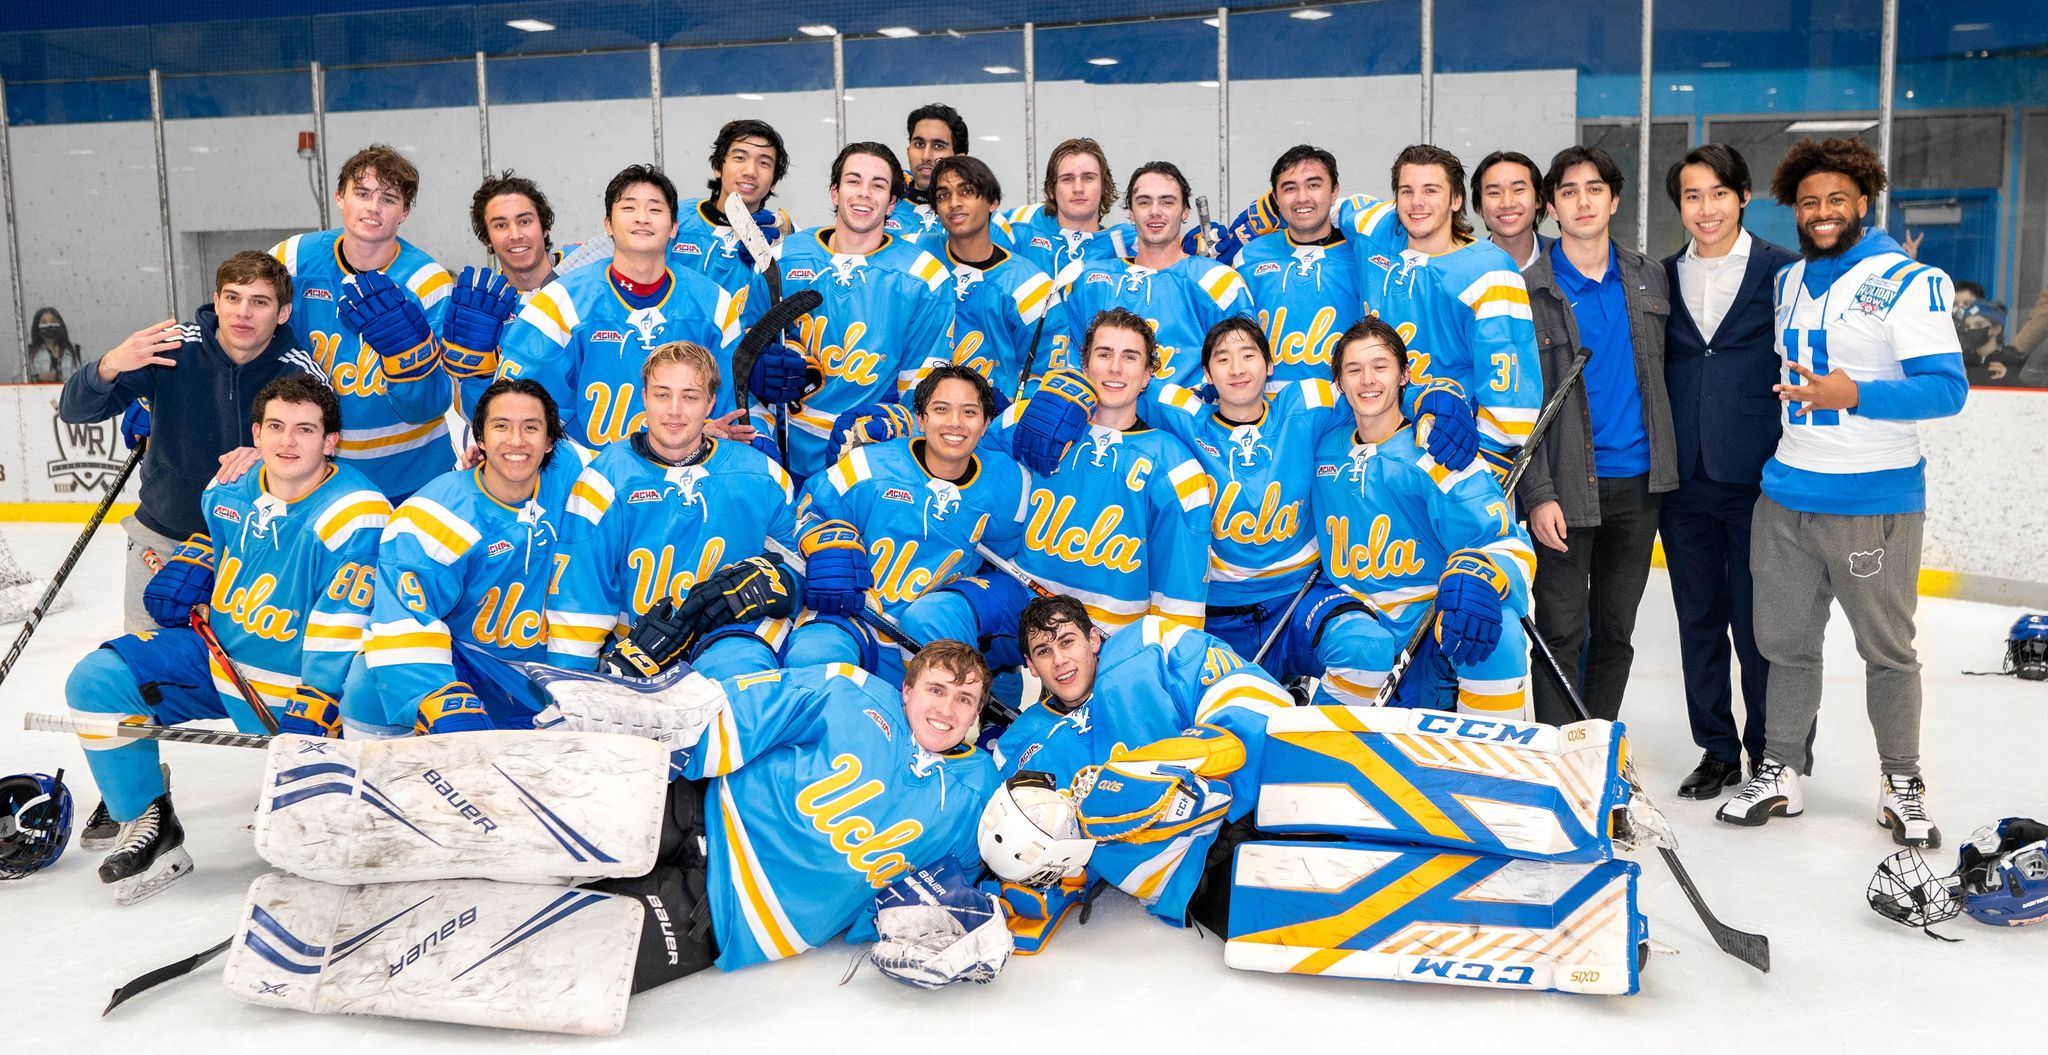 Oped Let’s Bring Back Division I Hockey to UCLA